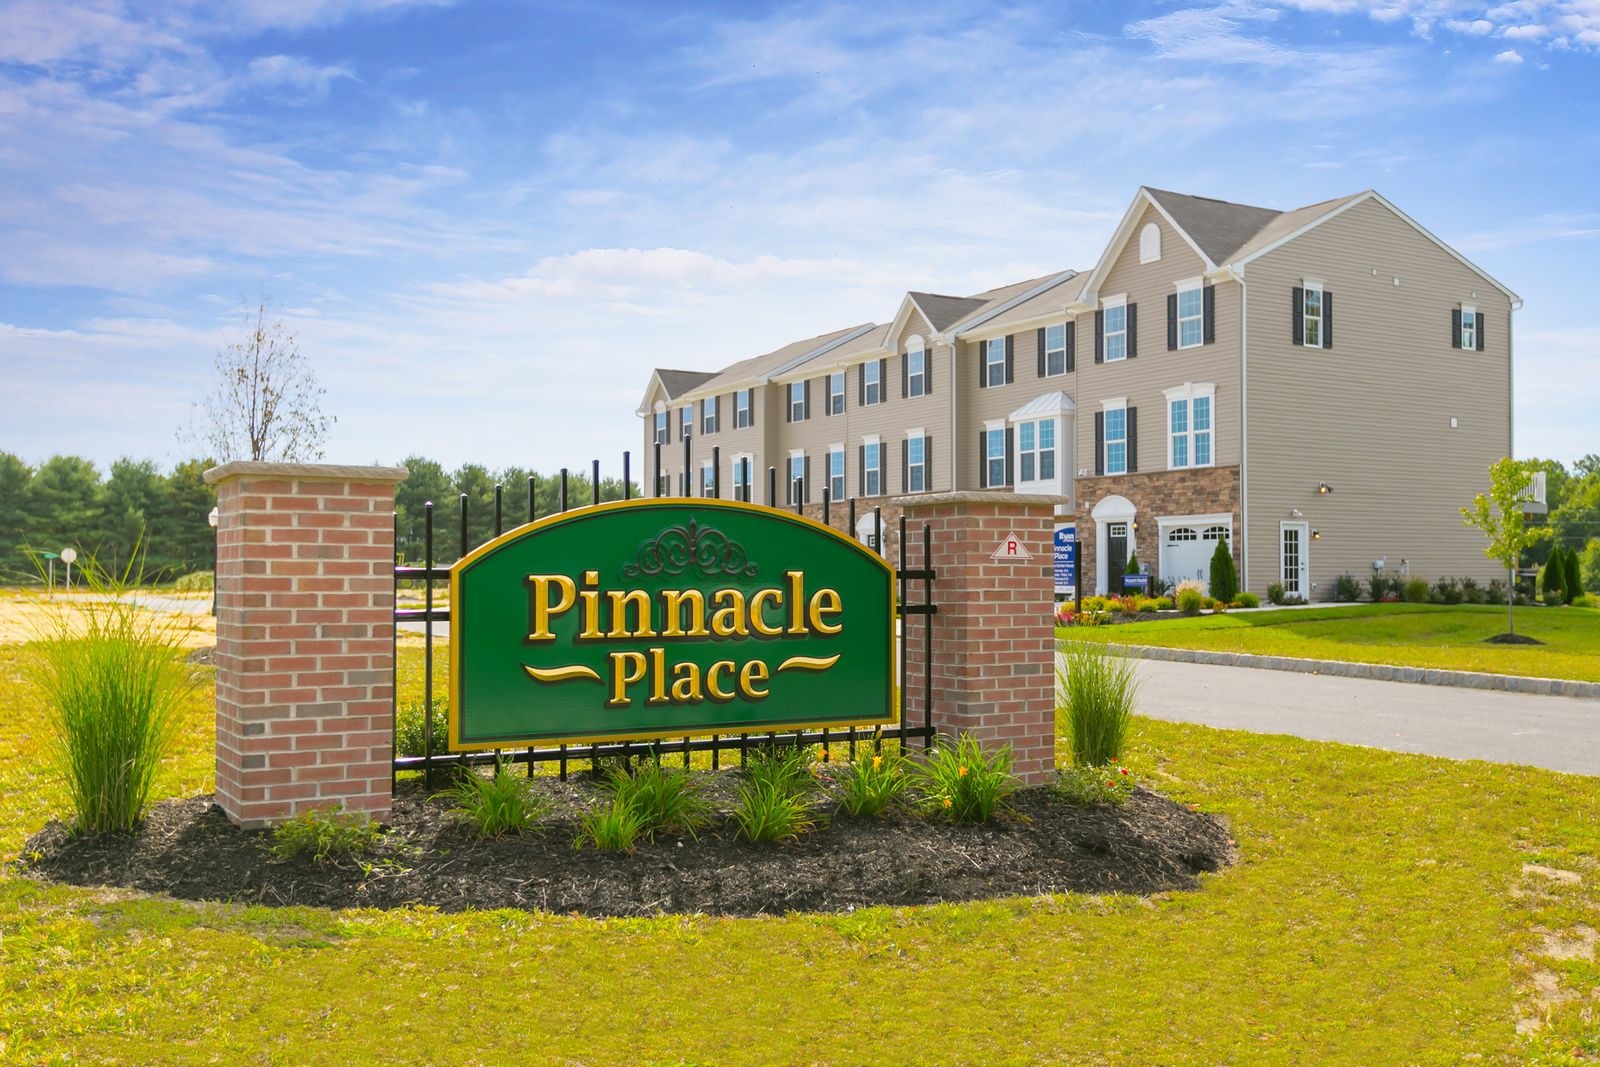 Welcome to Pinnacle Place